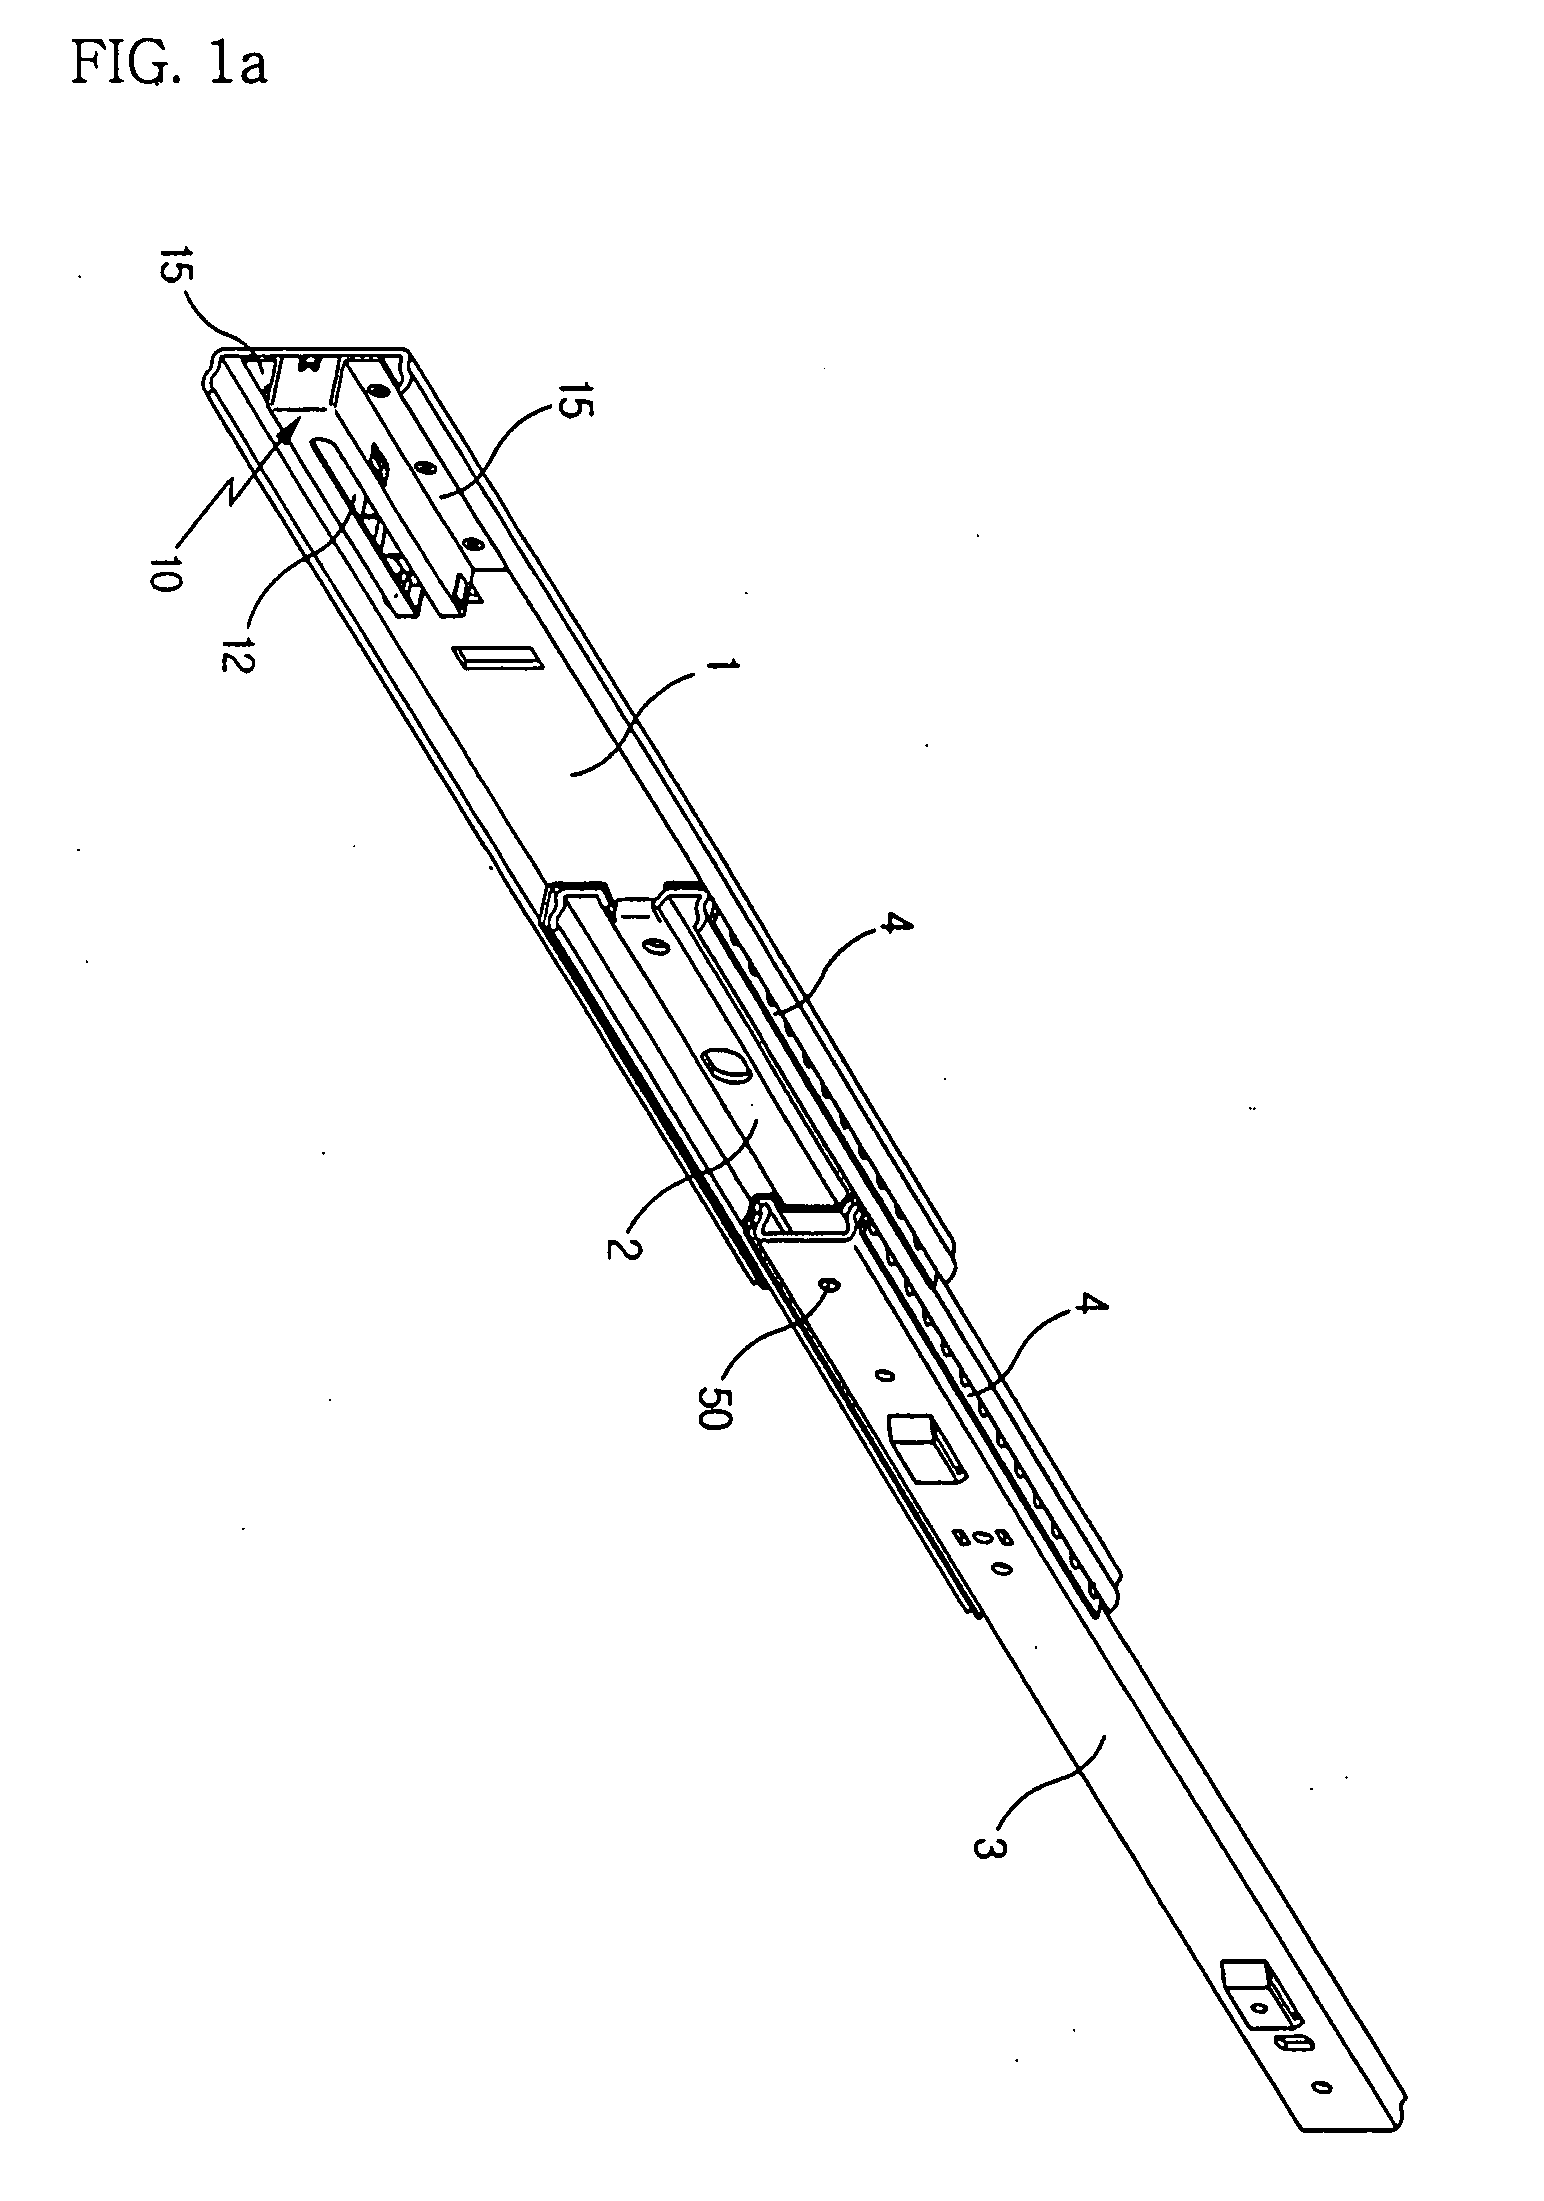 Self-closing and opening preventing device for slide rails